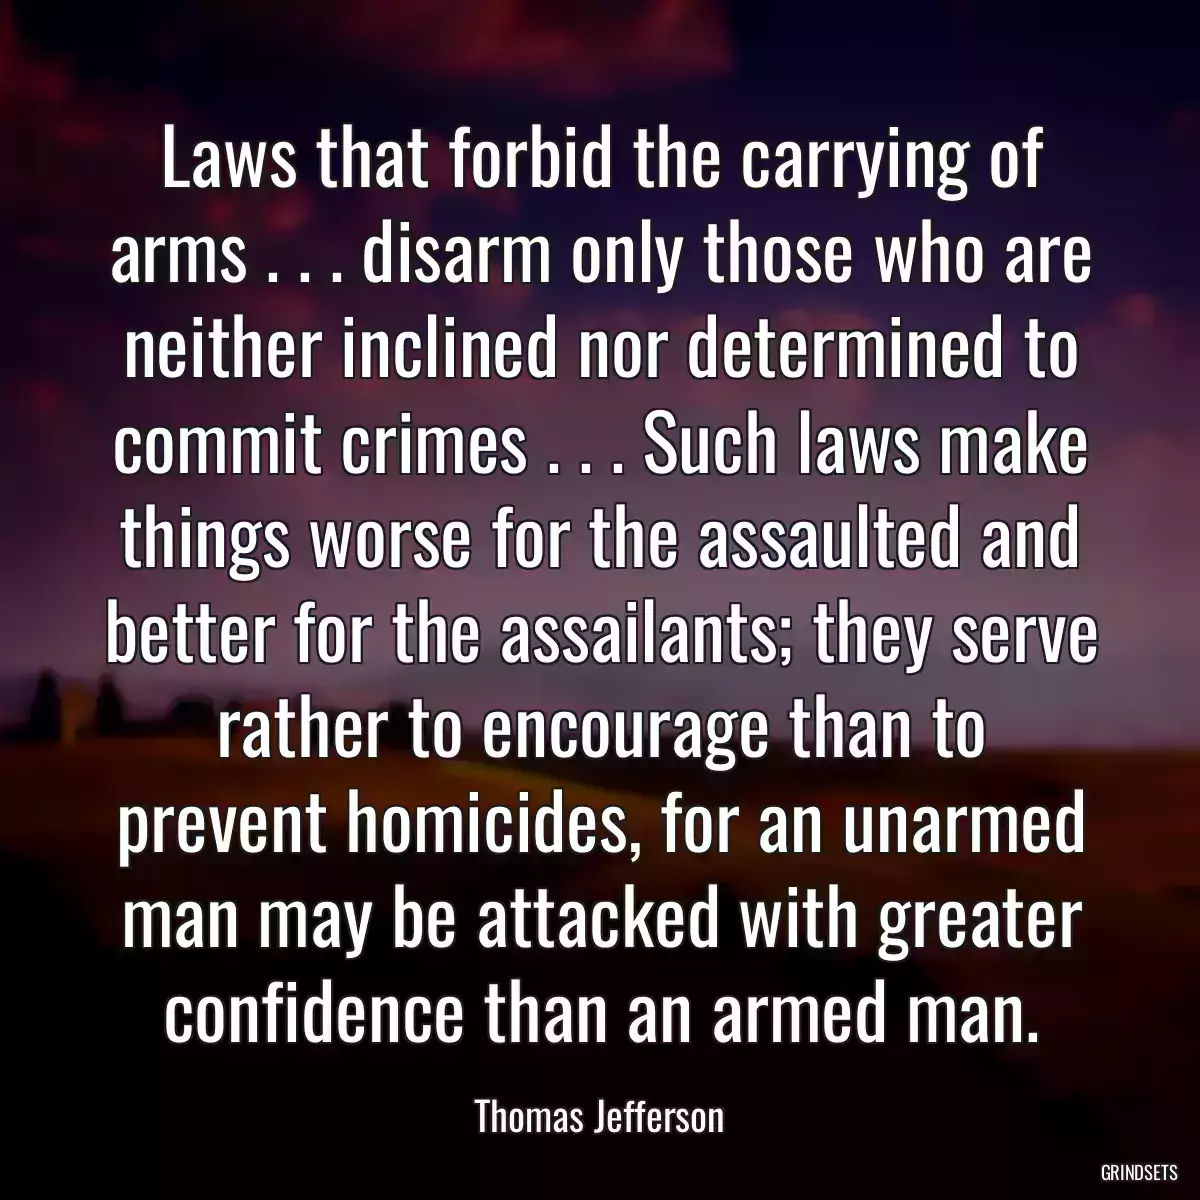 Laws that forbid the carrying of arms . . . disarm only those who are neither inclined nor determined to commit crimes . . . Such laws make things worse for the assaulted and better for the assailants; they serve rather to encourage than to prevent homicides, for an unarmed man may be attacked with greater confidence than an armed man.